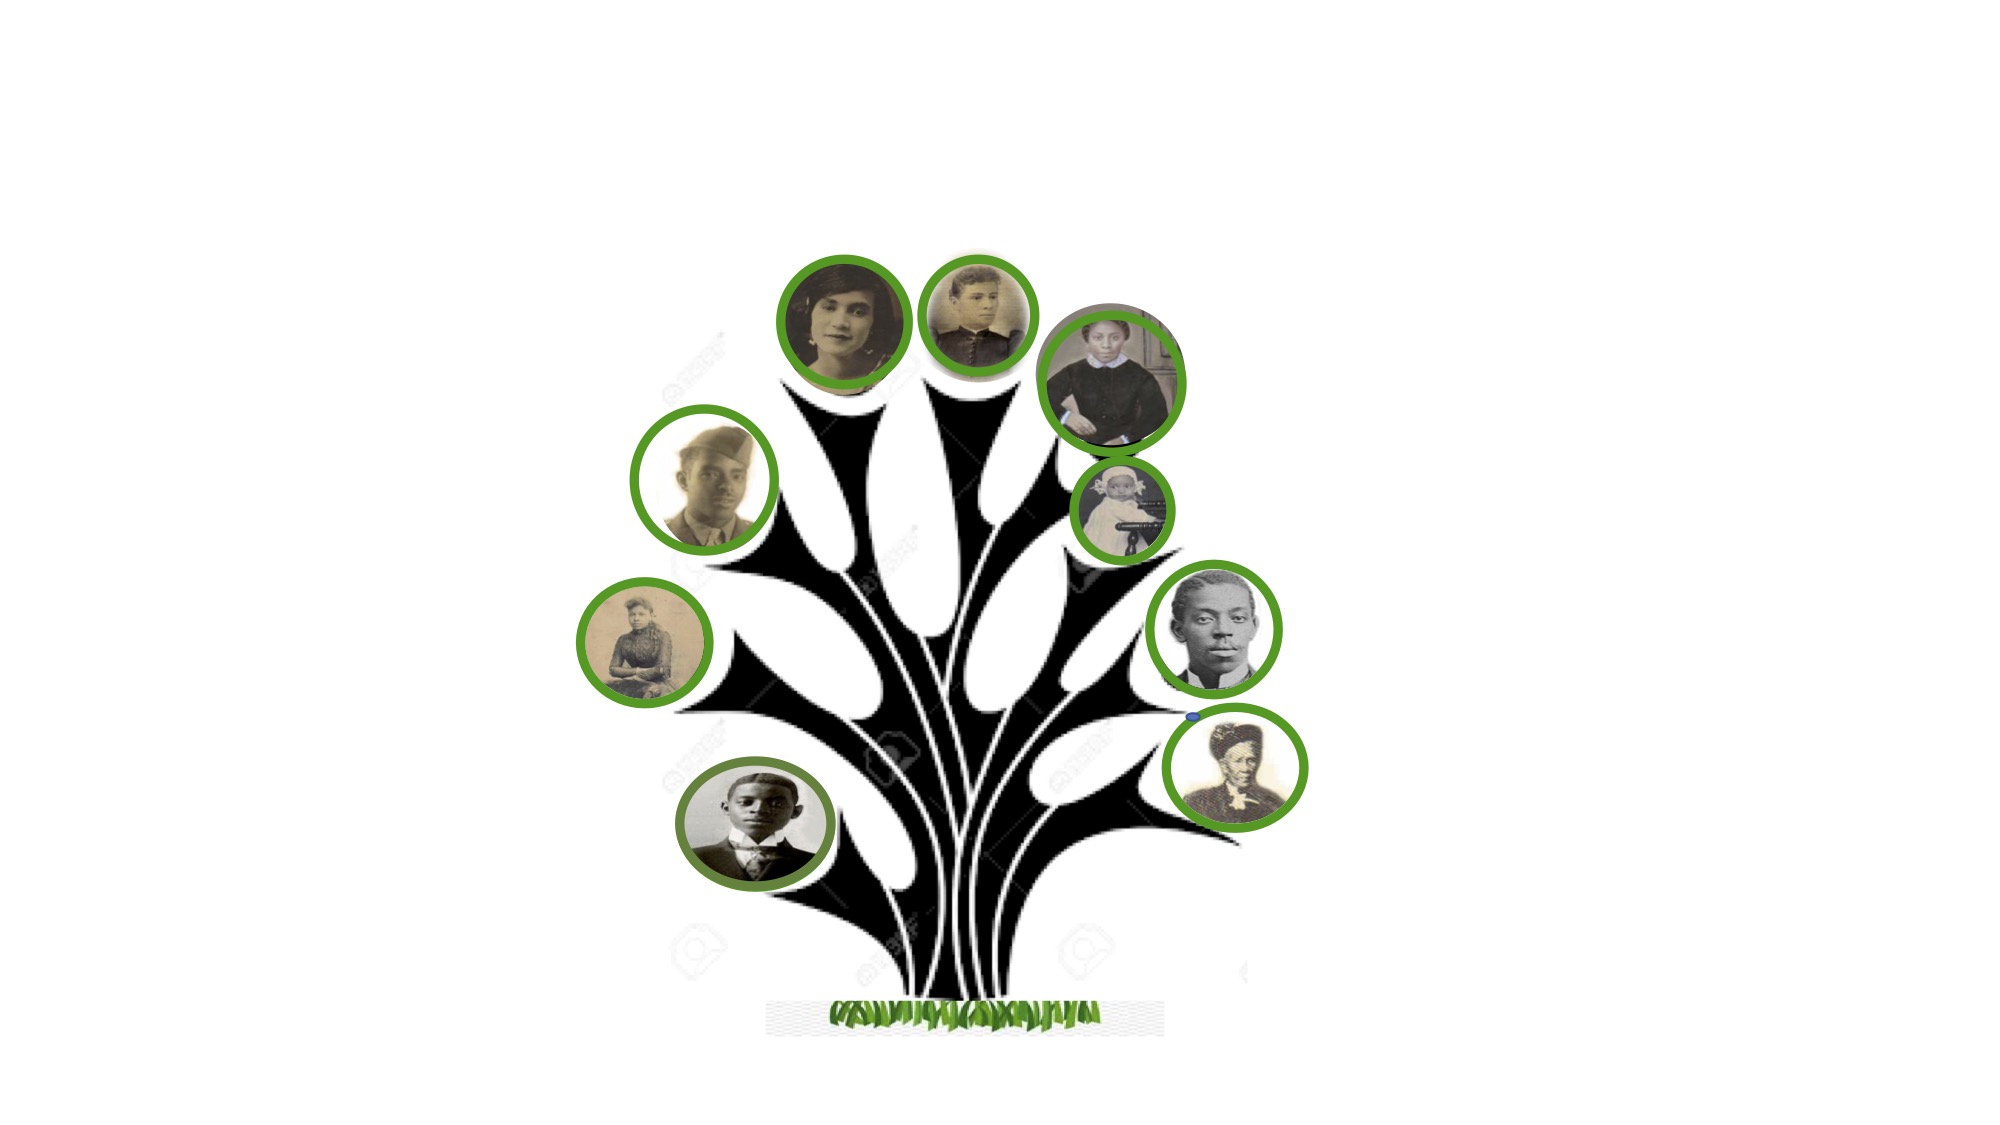 An image of a family tree